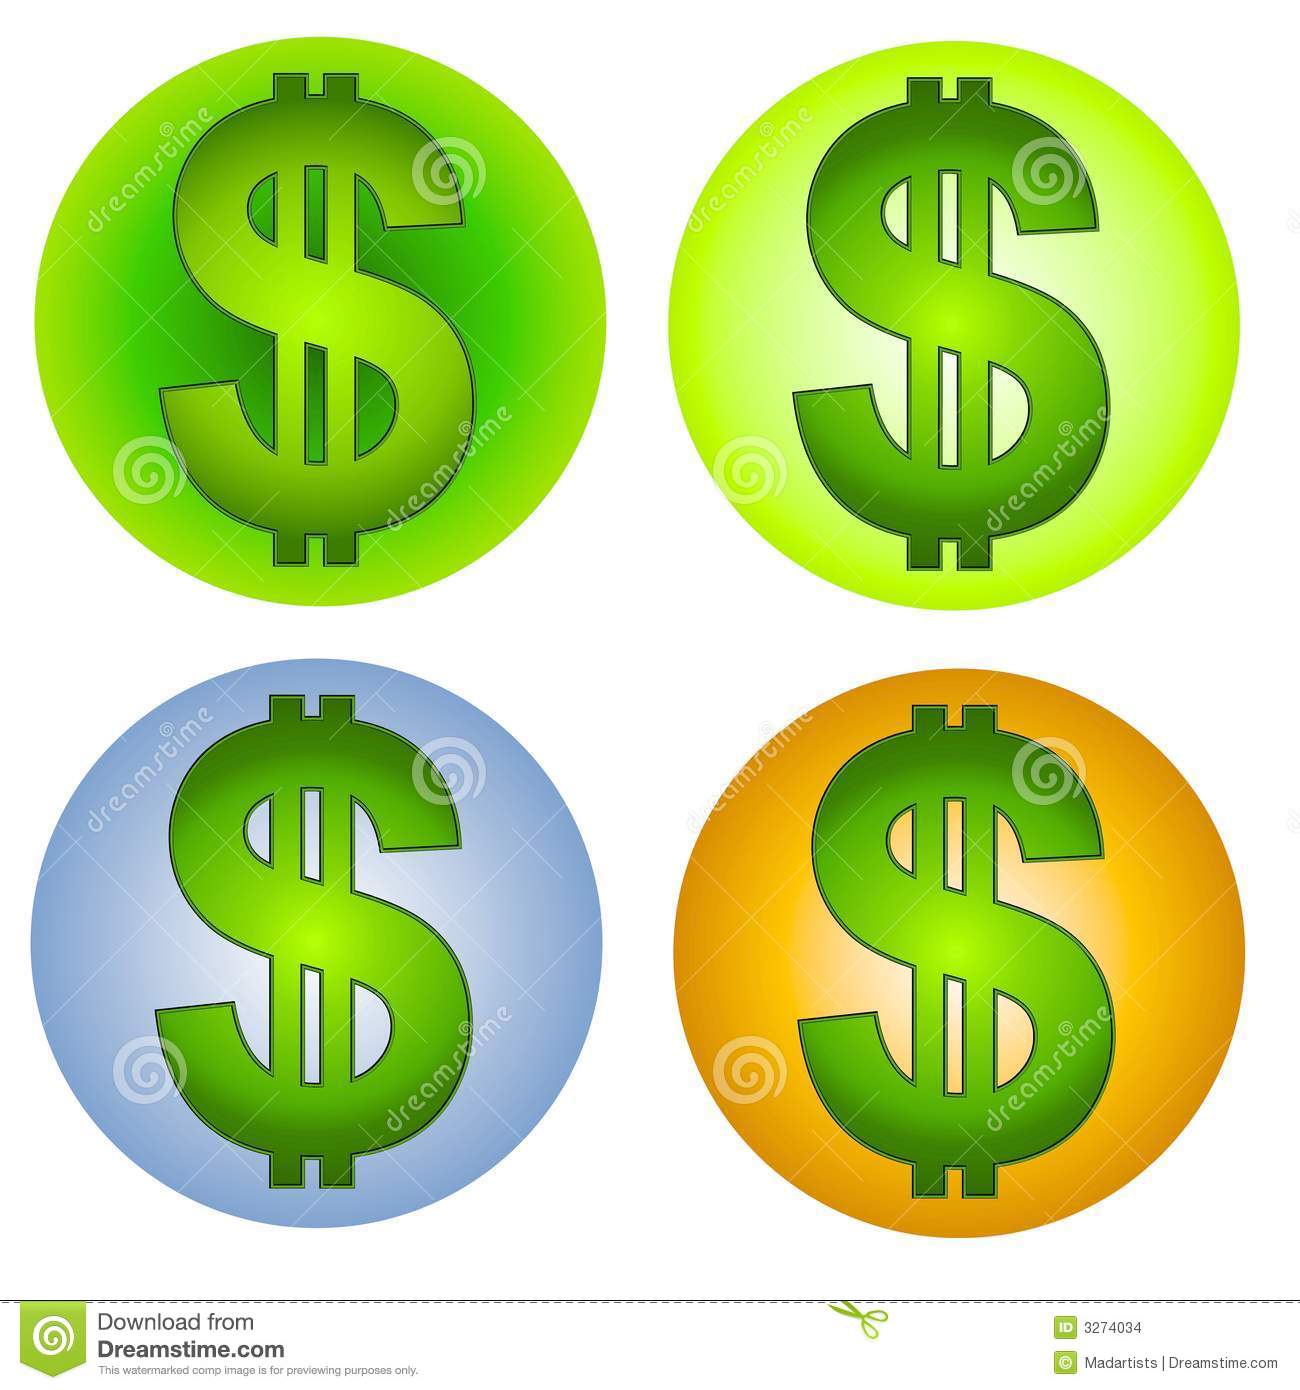 Clip Art Illustration Of 4 Different Cash Dollar Money Icons In Your